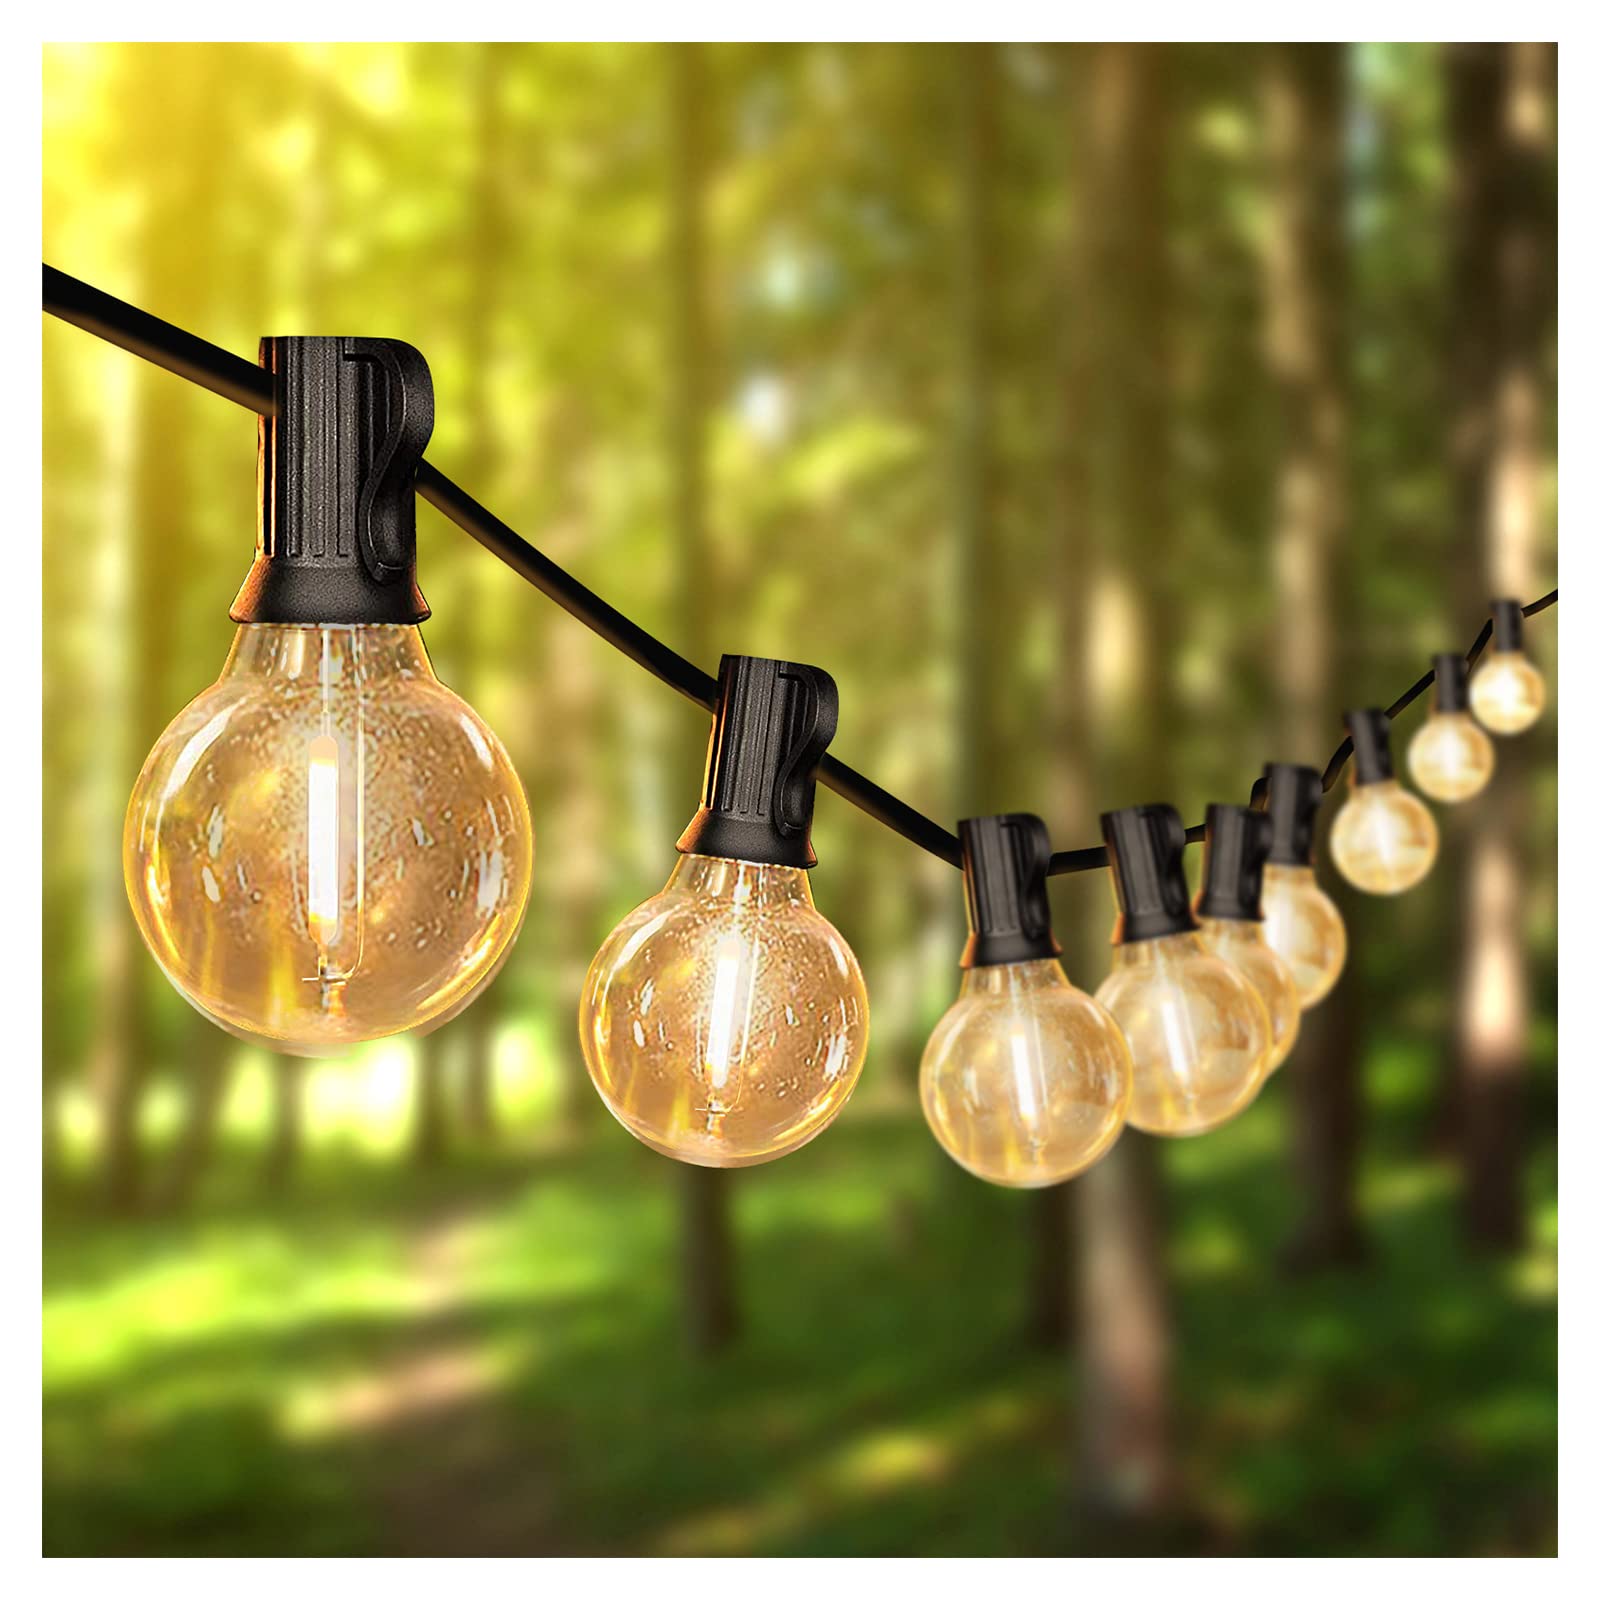 DAYBETTER 100ft Outdoor String Lights Waterproof, G40 Globe Led Patio Lights with 50 Edison Vintage Bulbs, Connectable Outdoor Lights for Yard Porch Bistro